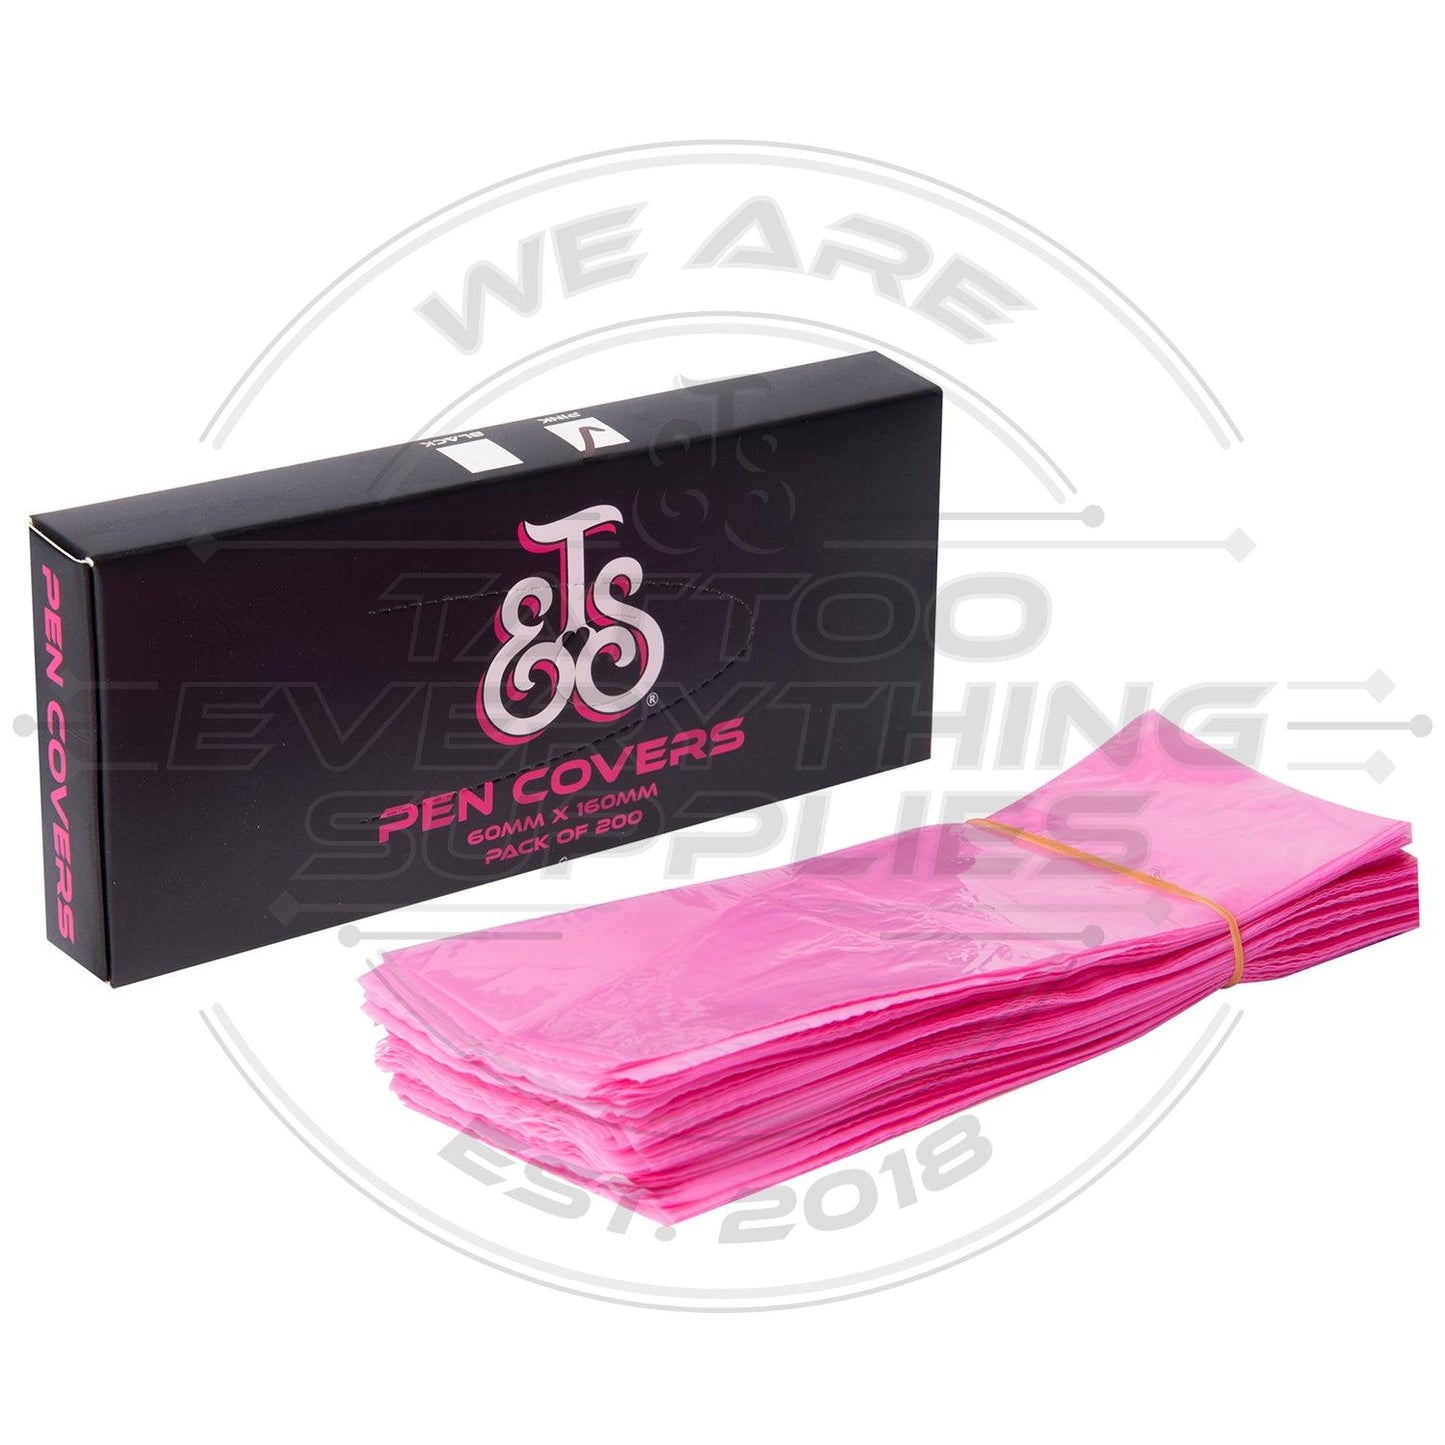 TES Hygiene Covers (Clip cord, Wash Bottle, Pen and Machine Bags)